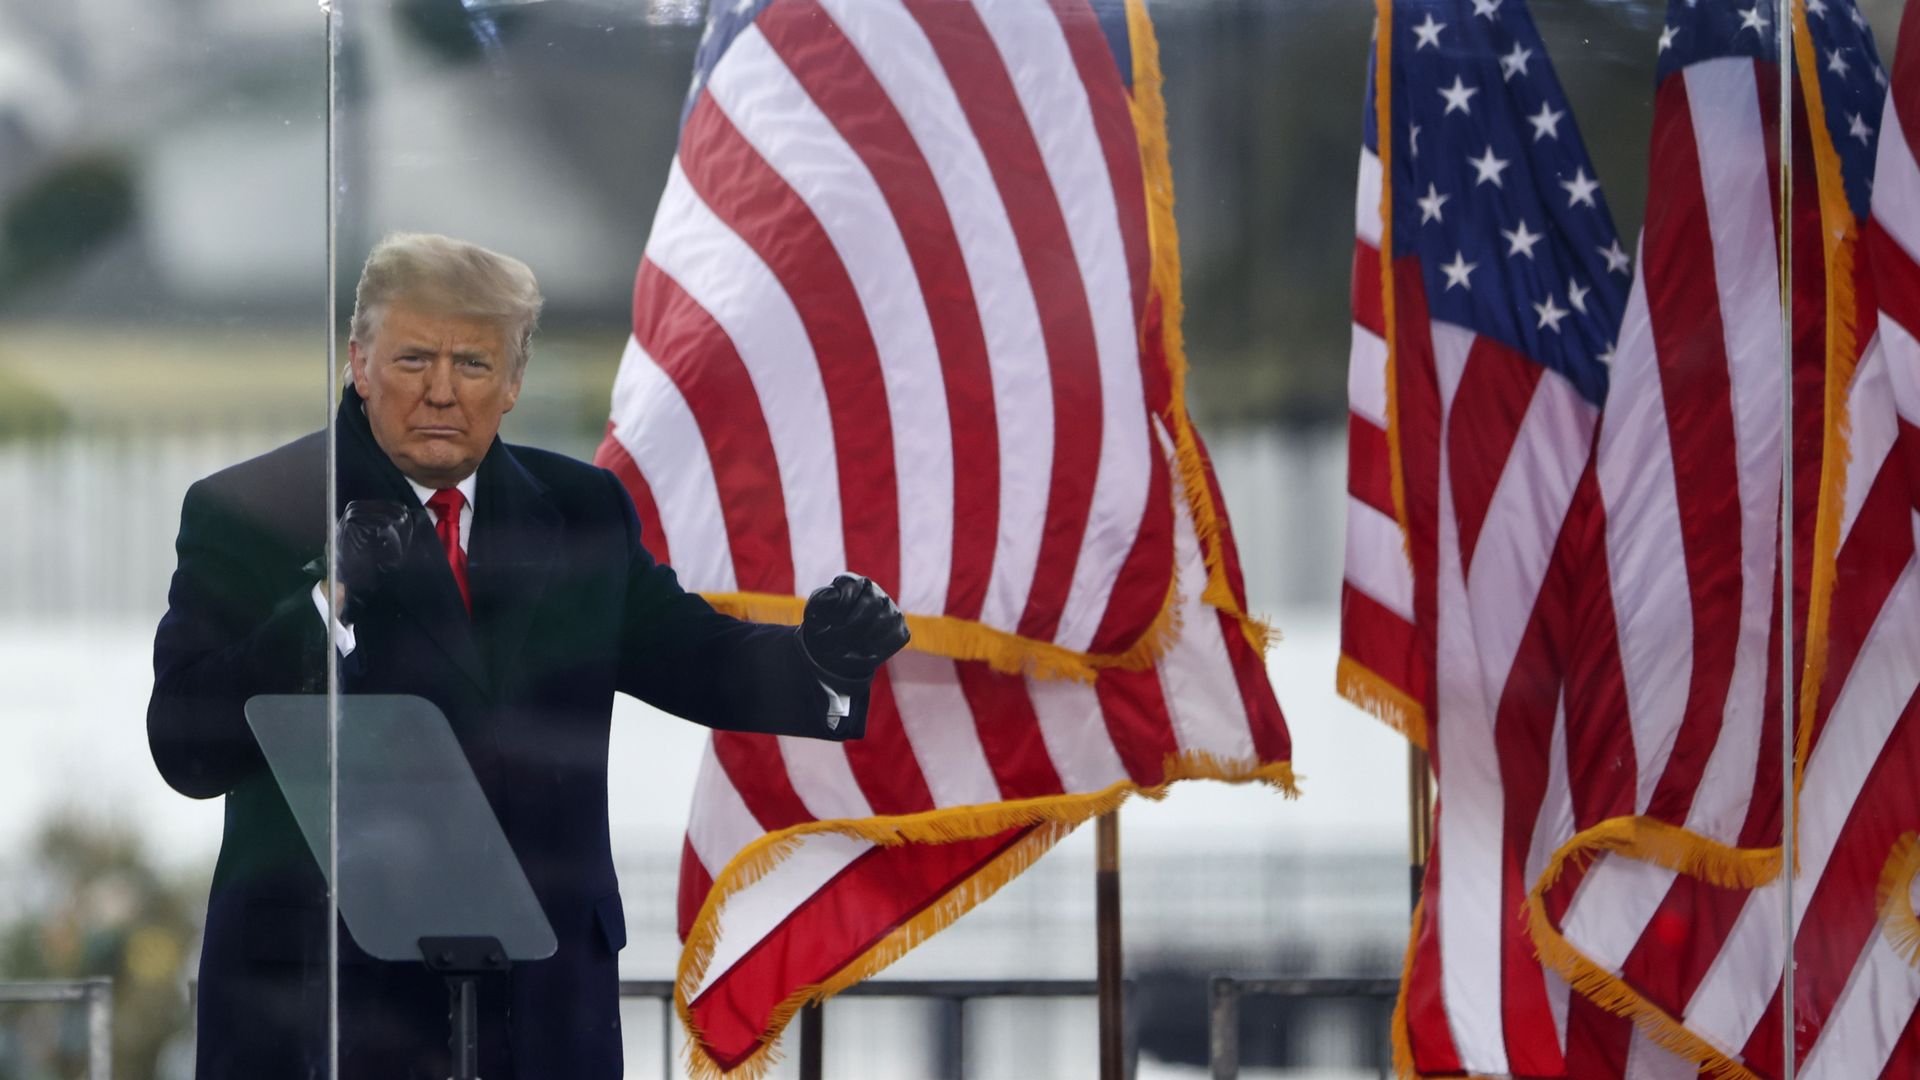 President Donald Trump greets the crowd at the "Stop The Steal" Rally on January 06, 2021 in Washington, DC.